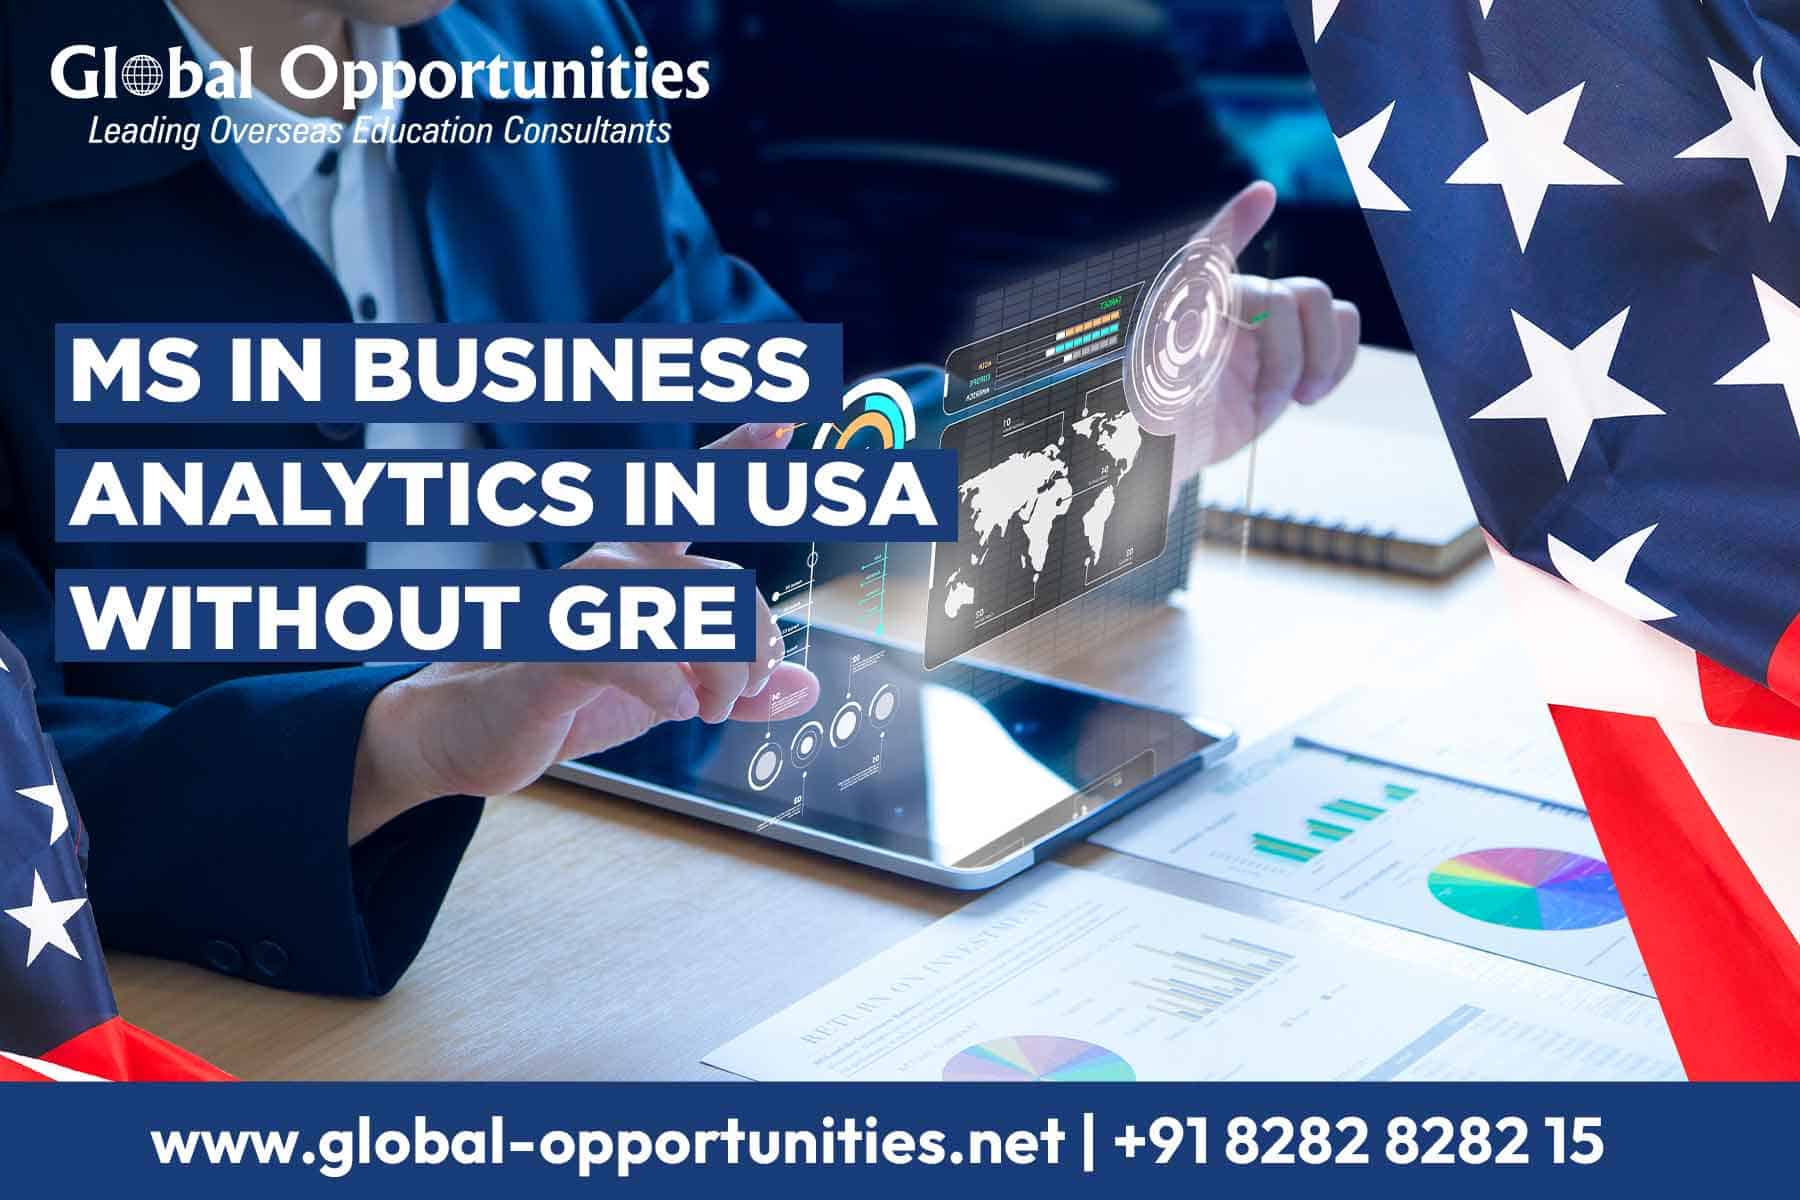 MS in Business Analytics in USA without GRE